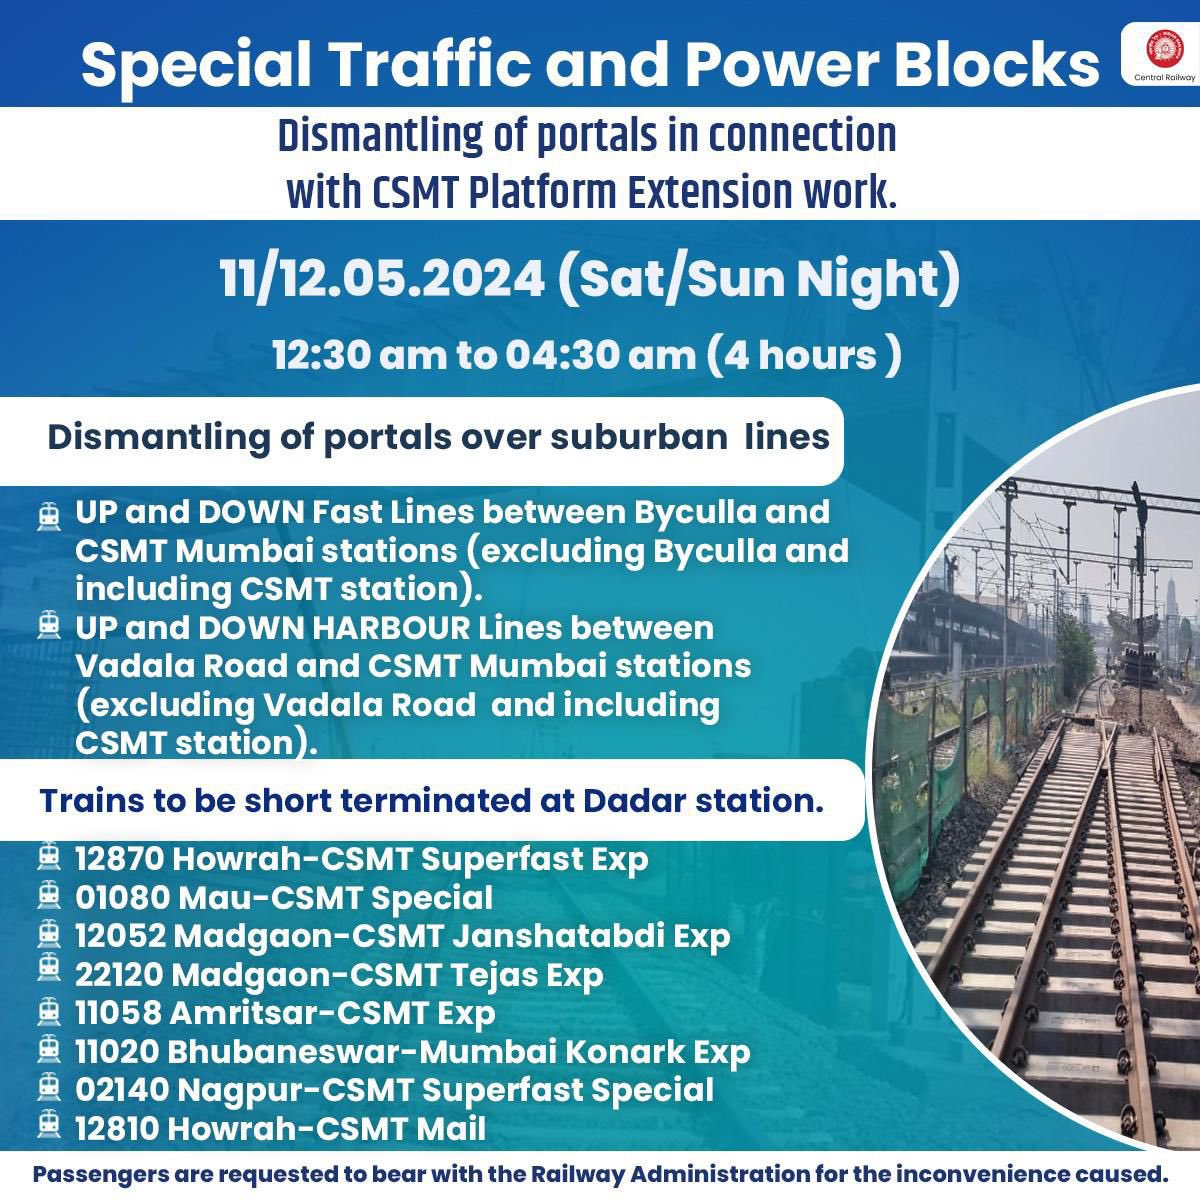 Today midnight Traffic and Power Blocks for Dismantling of portals - 11/12.05.2024 (Saturday/ Sunday Night). Kindly note the Mail/Express trains to be short terminated at Dadar station. The inconvenience caused is highly regretted, and passengers are requested to bear with the…